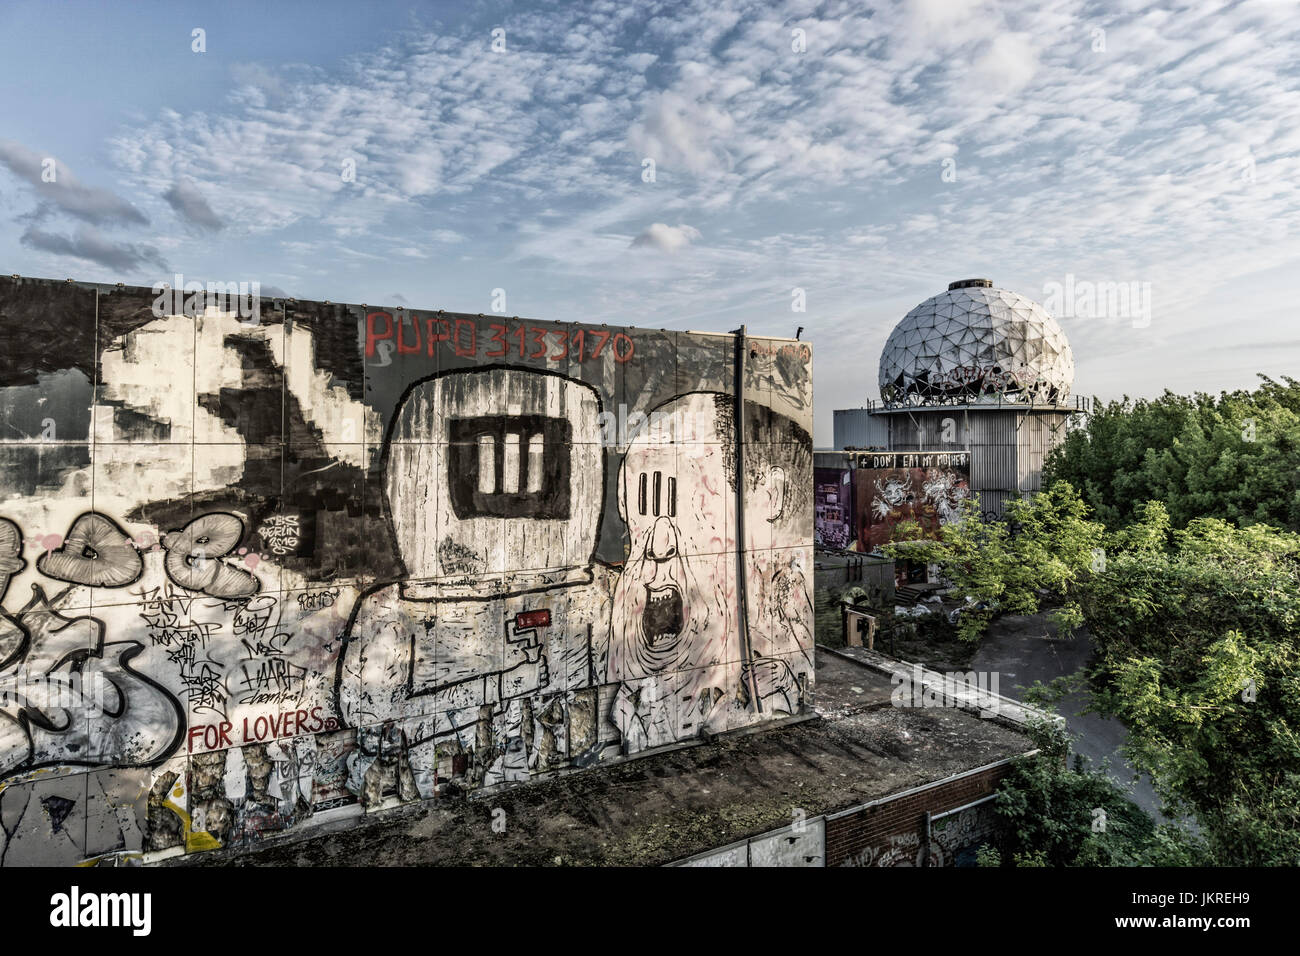 Teufelsberg, former monitoring system of the U.S. Army, abandoned building, Graffiti,  Berlin, Germany Stock Photo